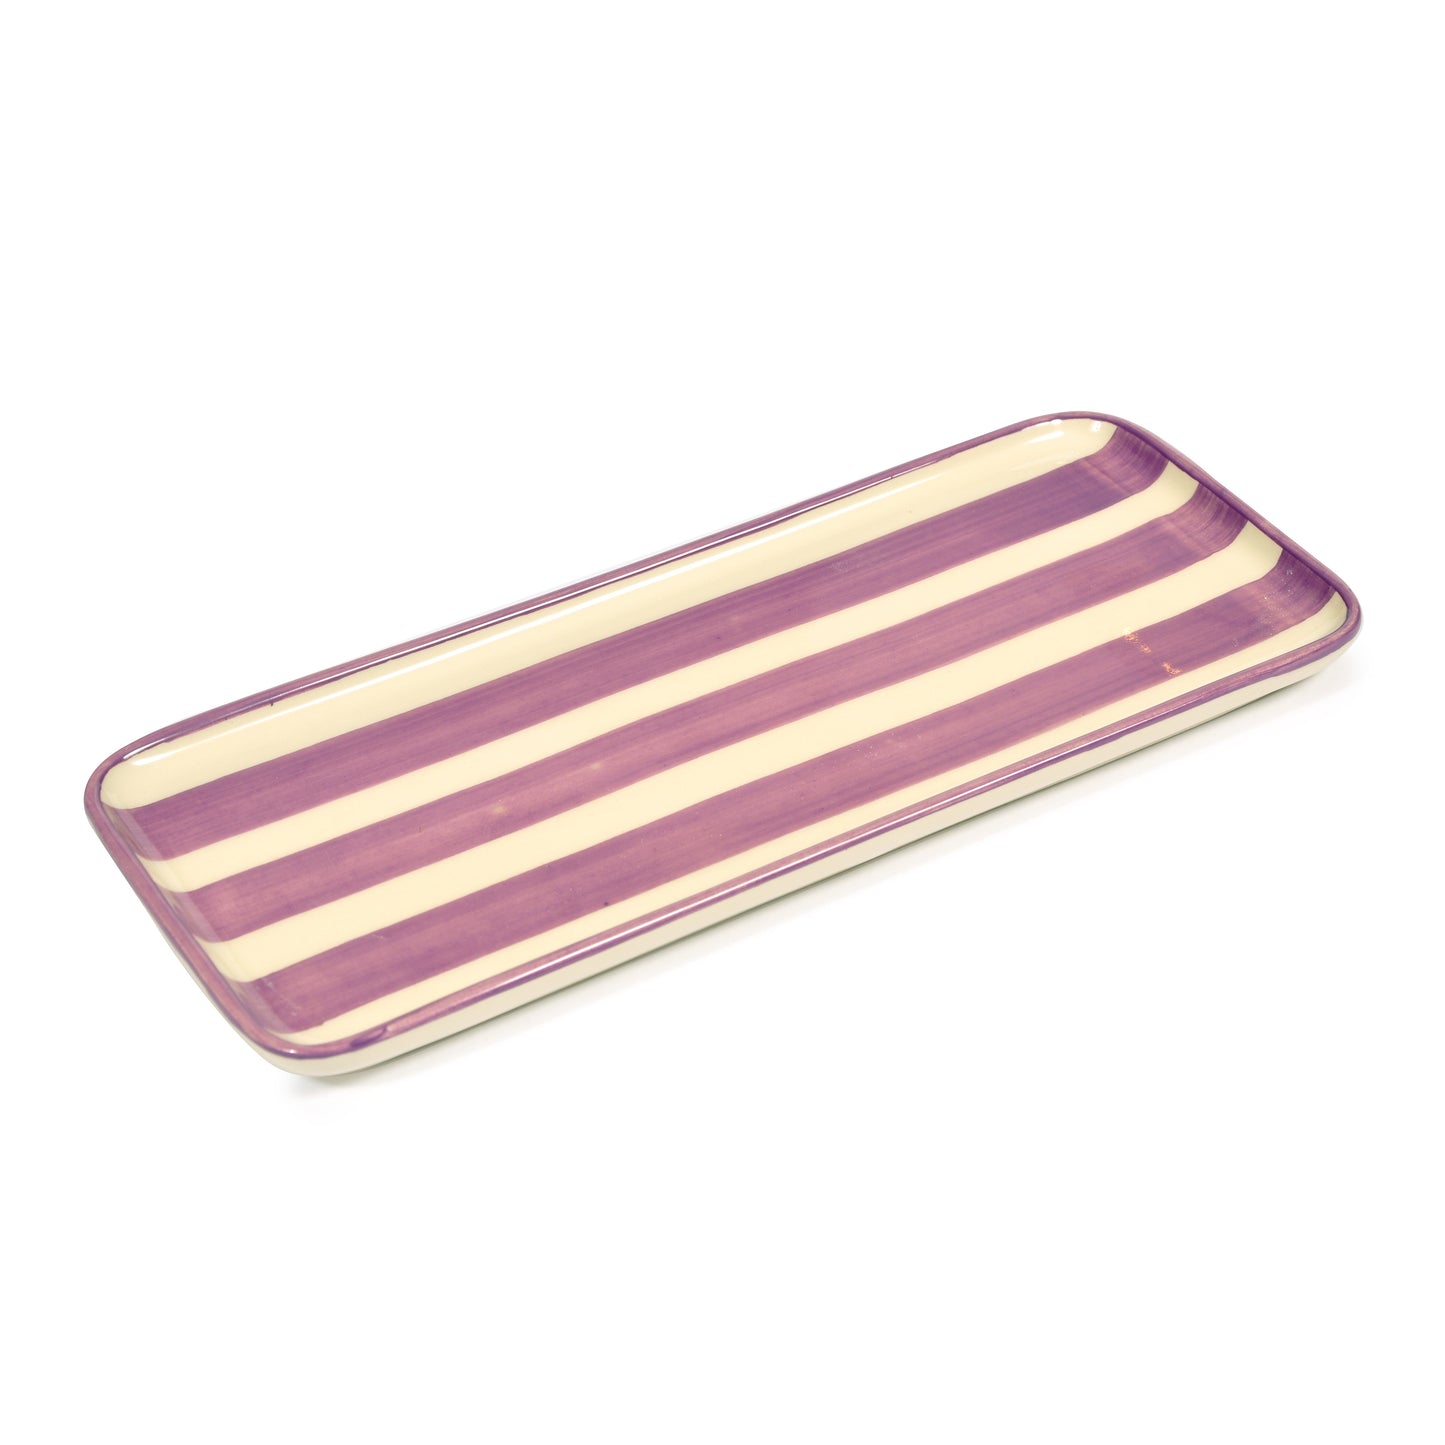 Lavender Striped Porcelain Tray Not specified